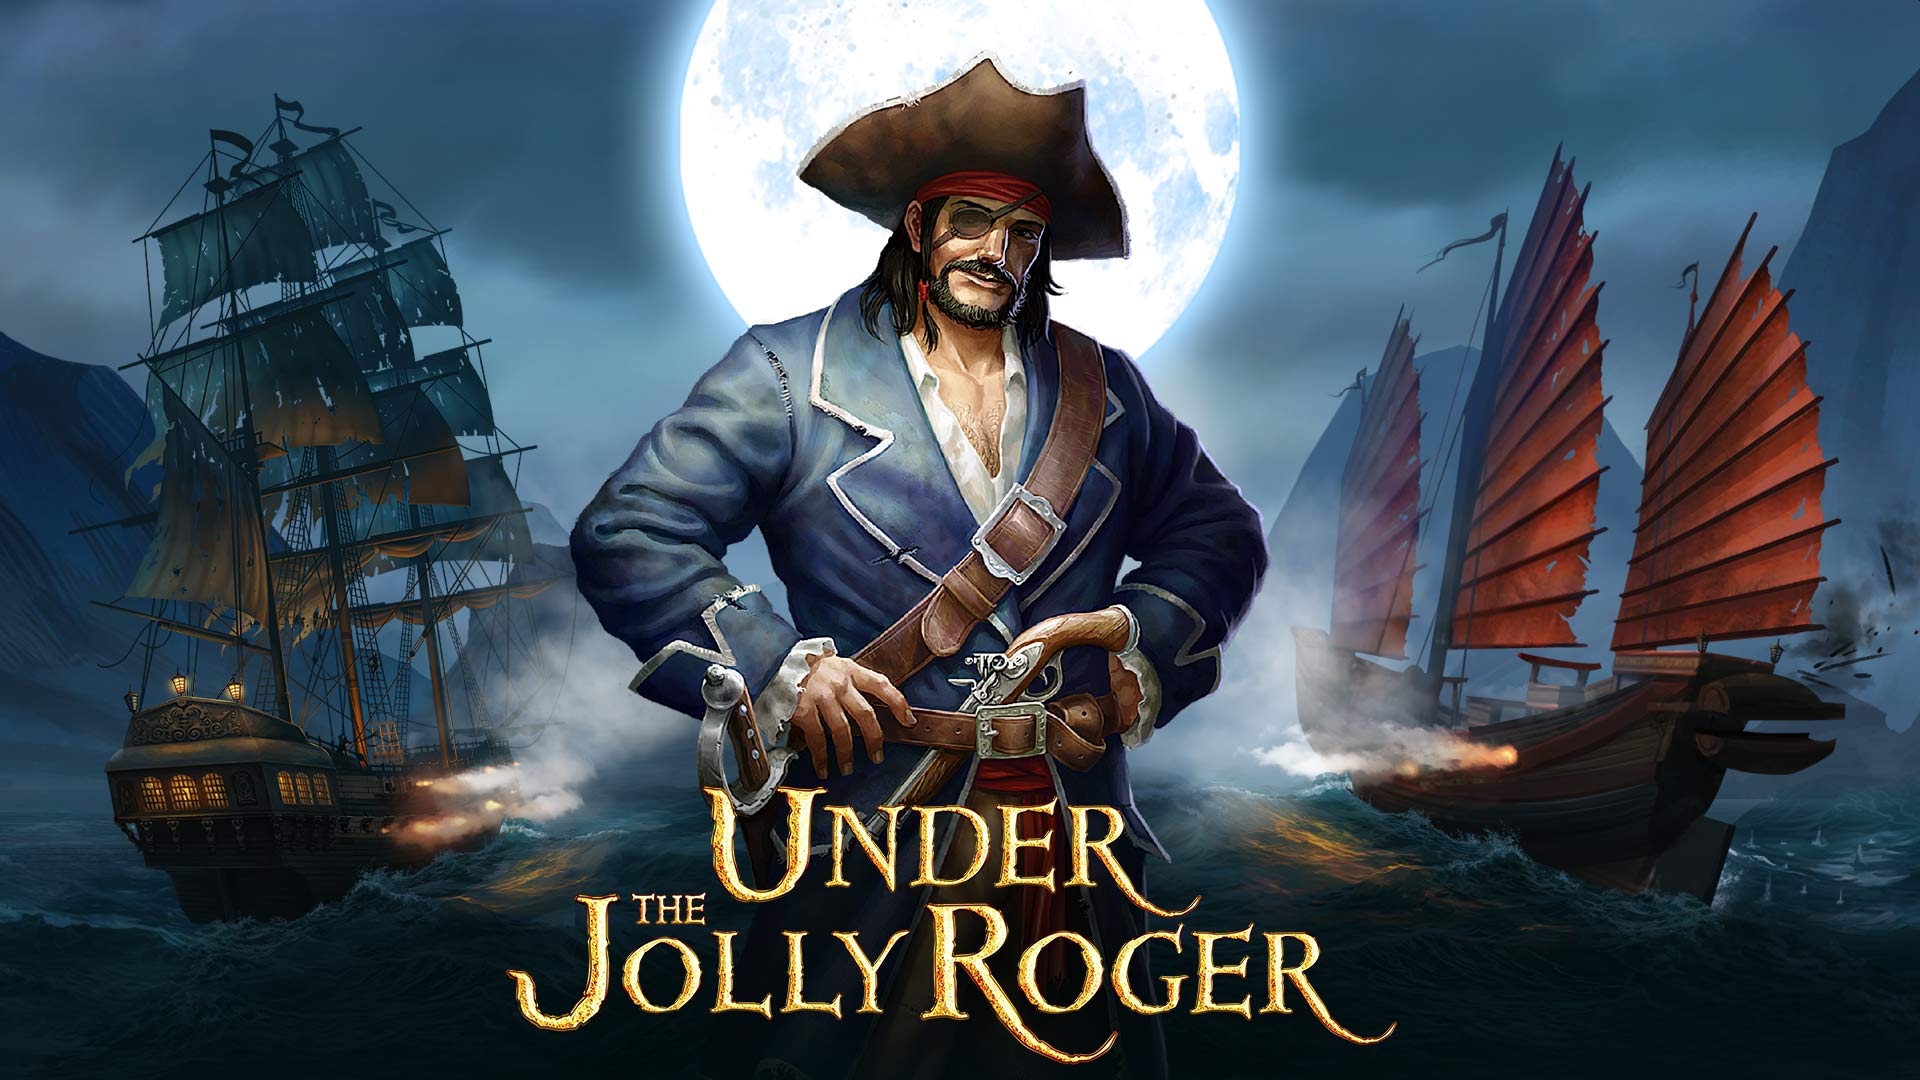 Open World Pirate Action RPG Under the Jolly Roger Sets Sail On September 3